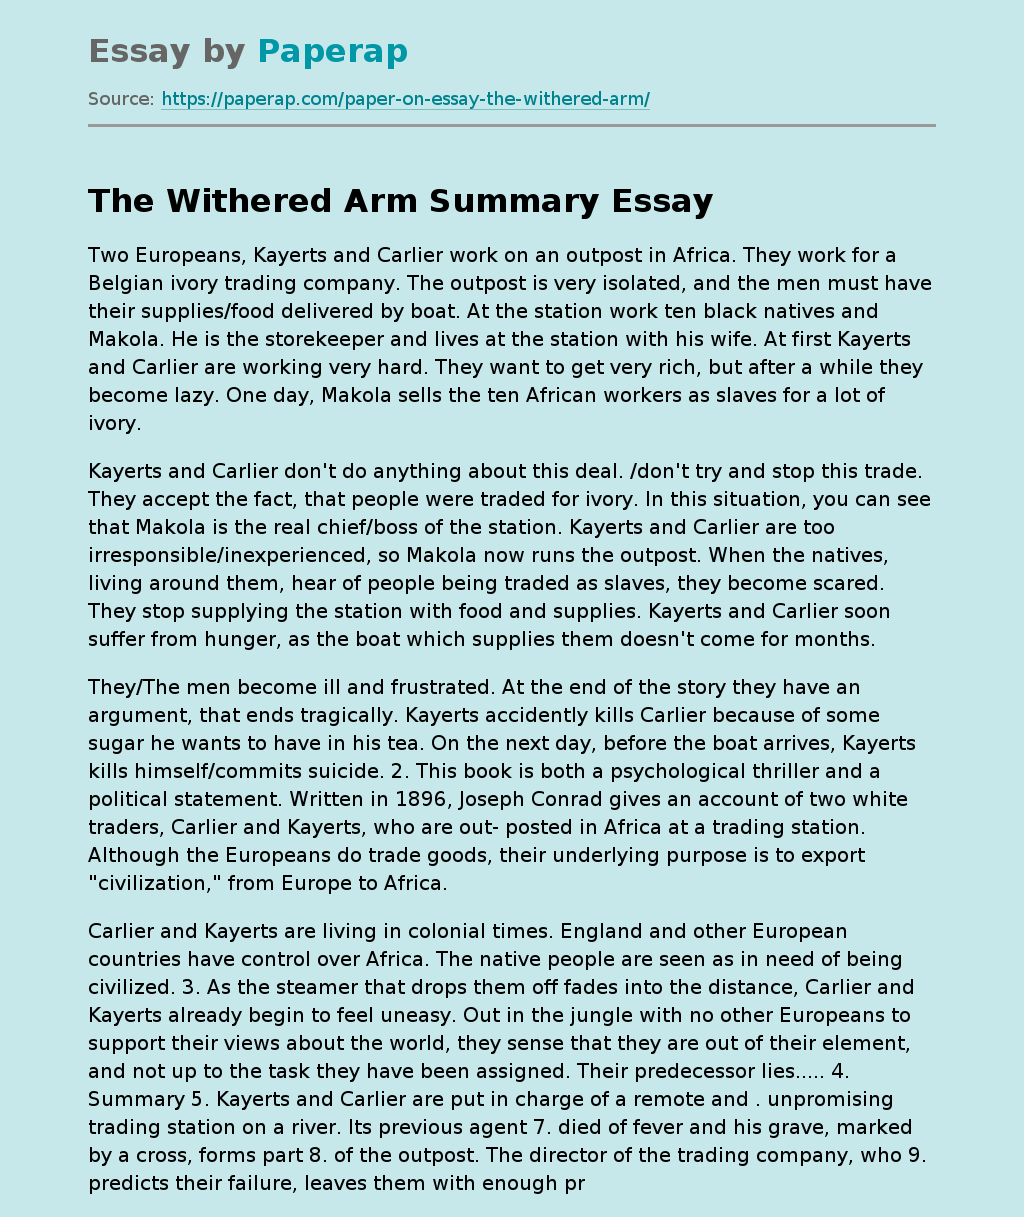 The Withered Arm Summary